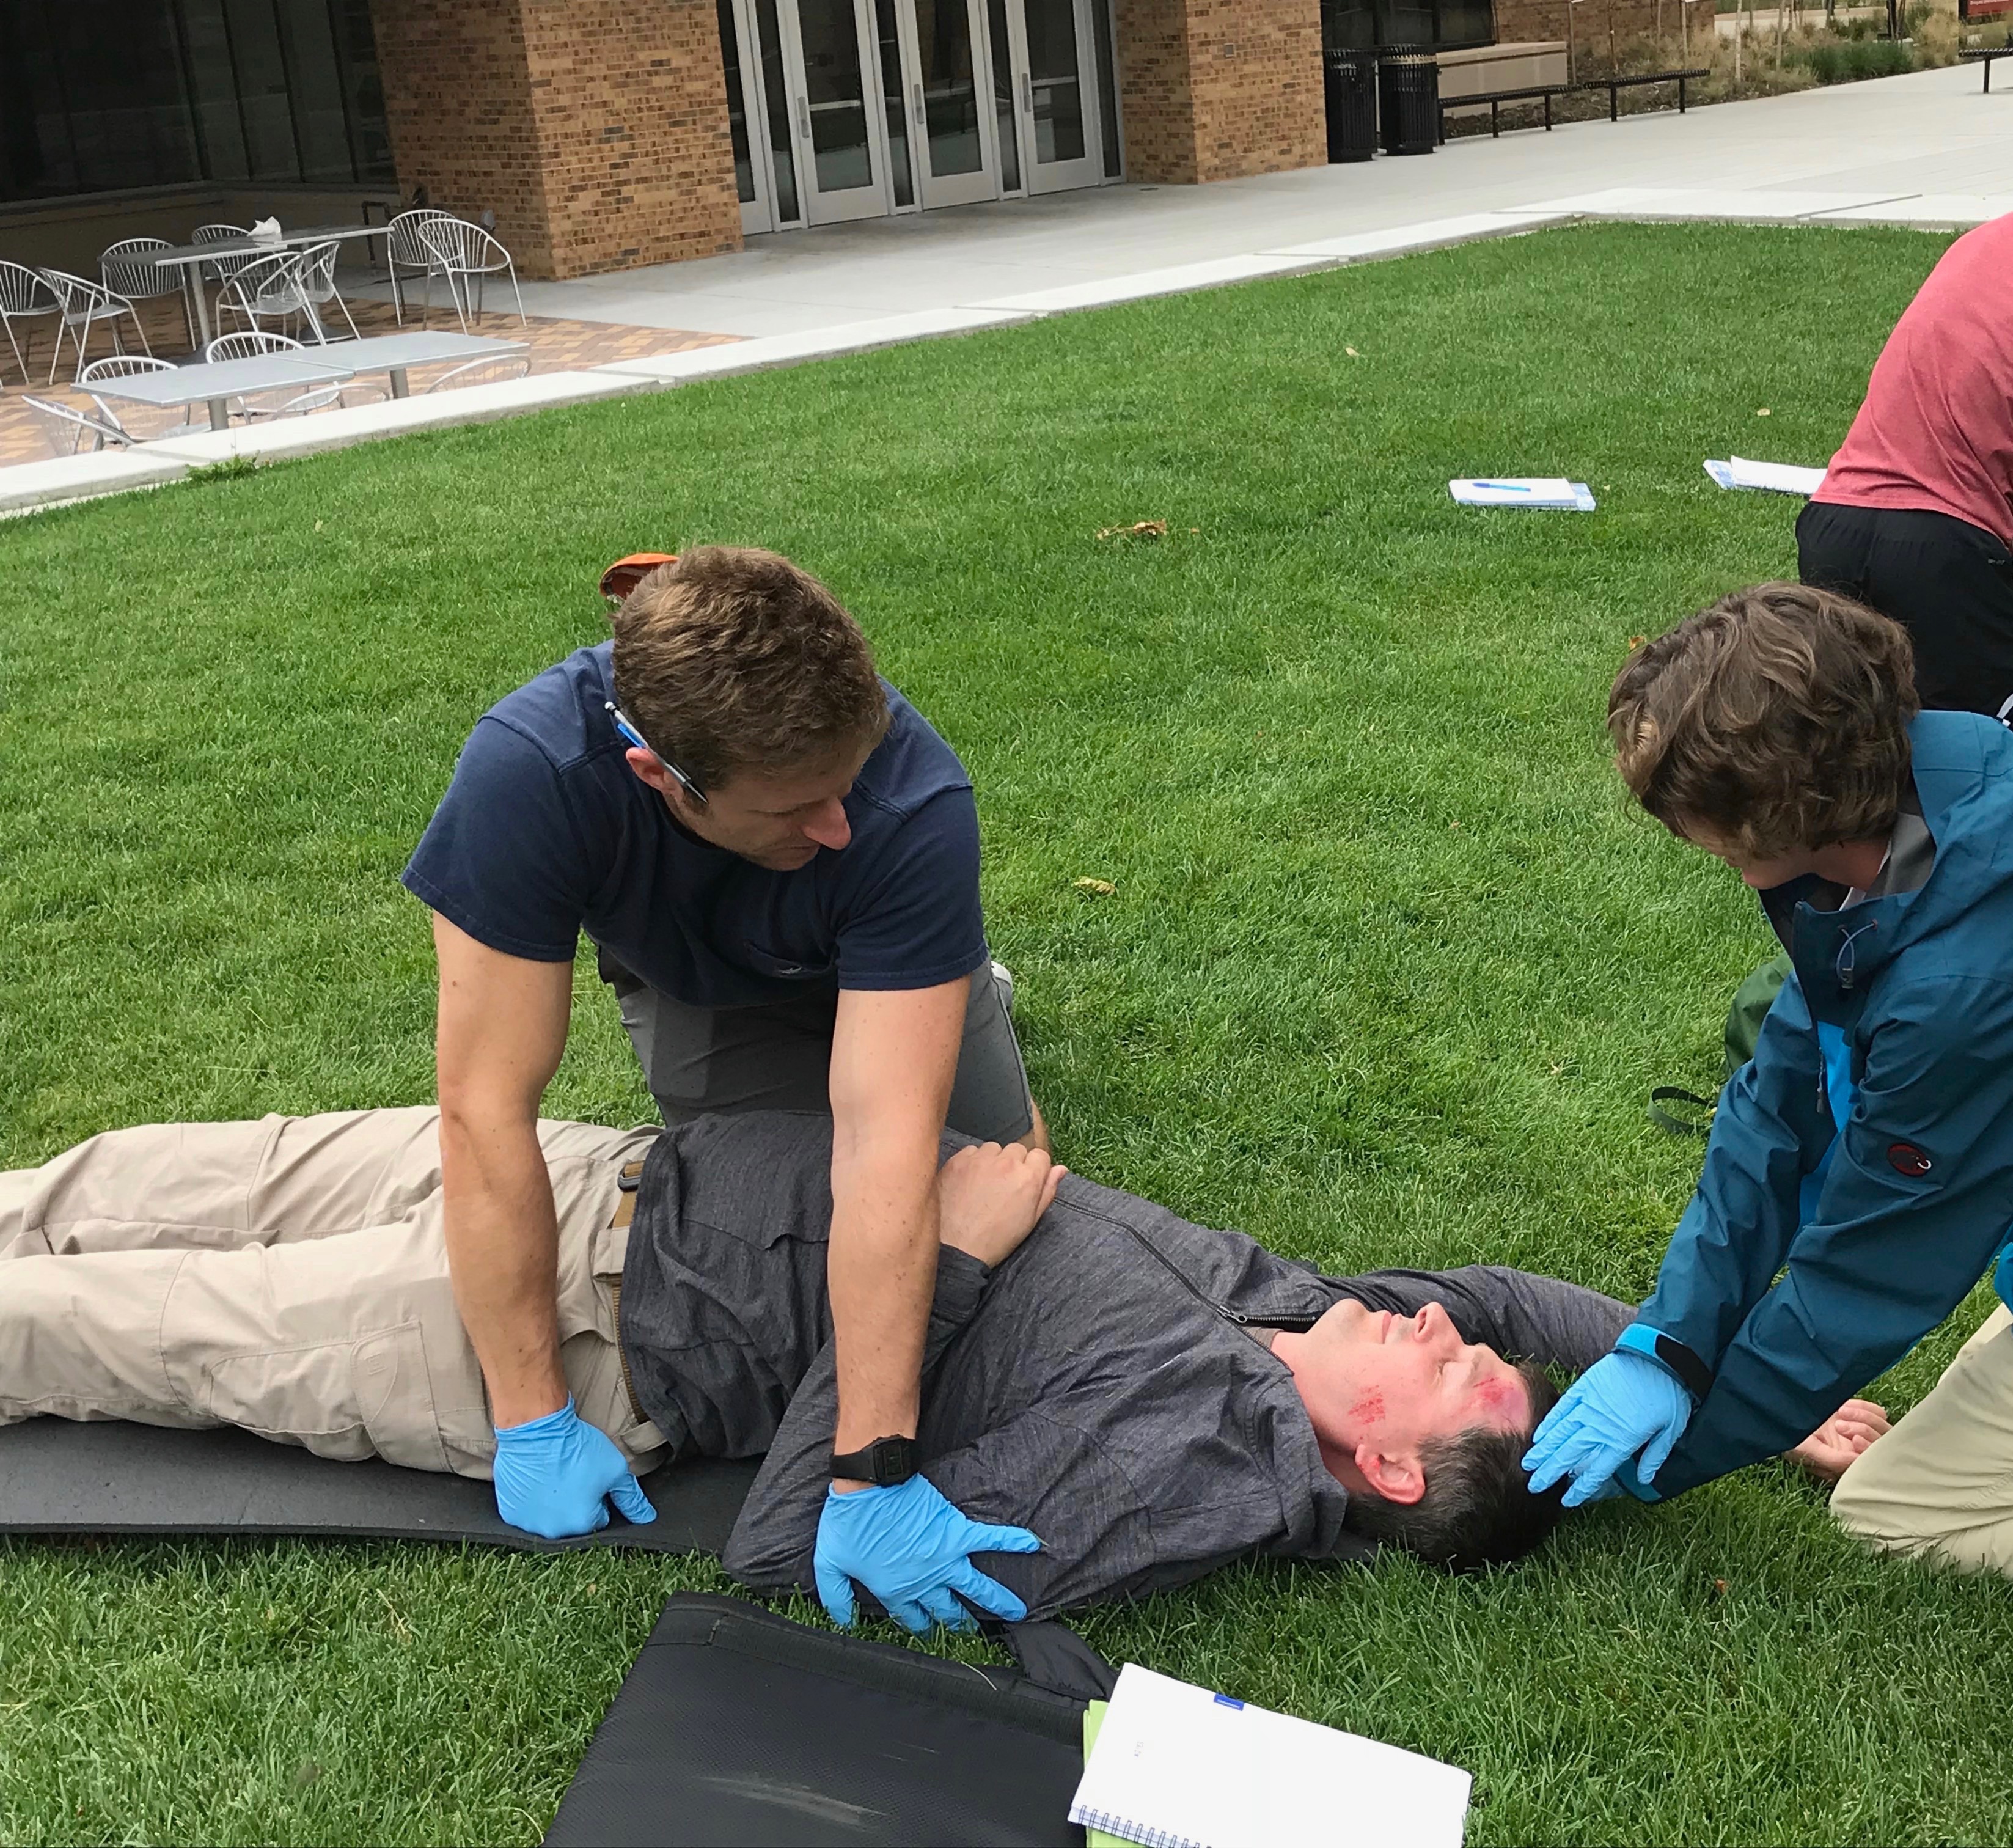 Two students, on a lawn, practice assessing a patient who is on the ground with blood on his head